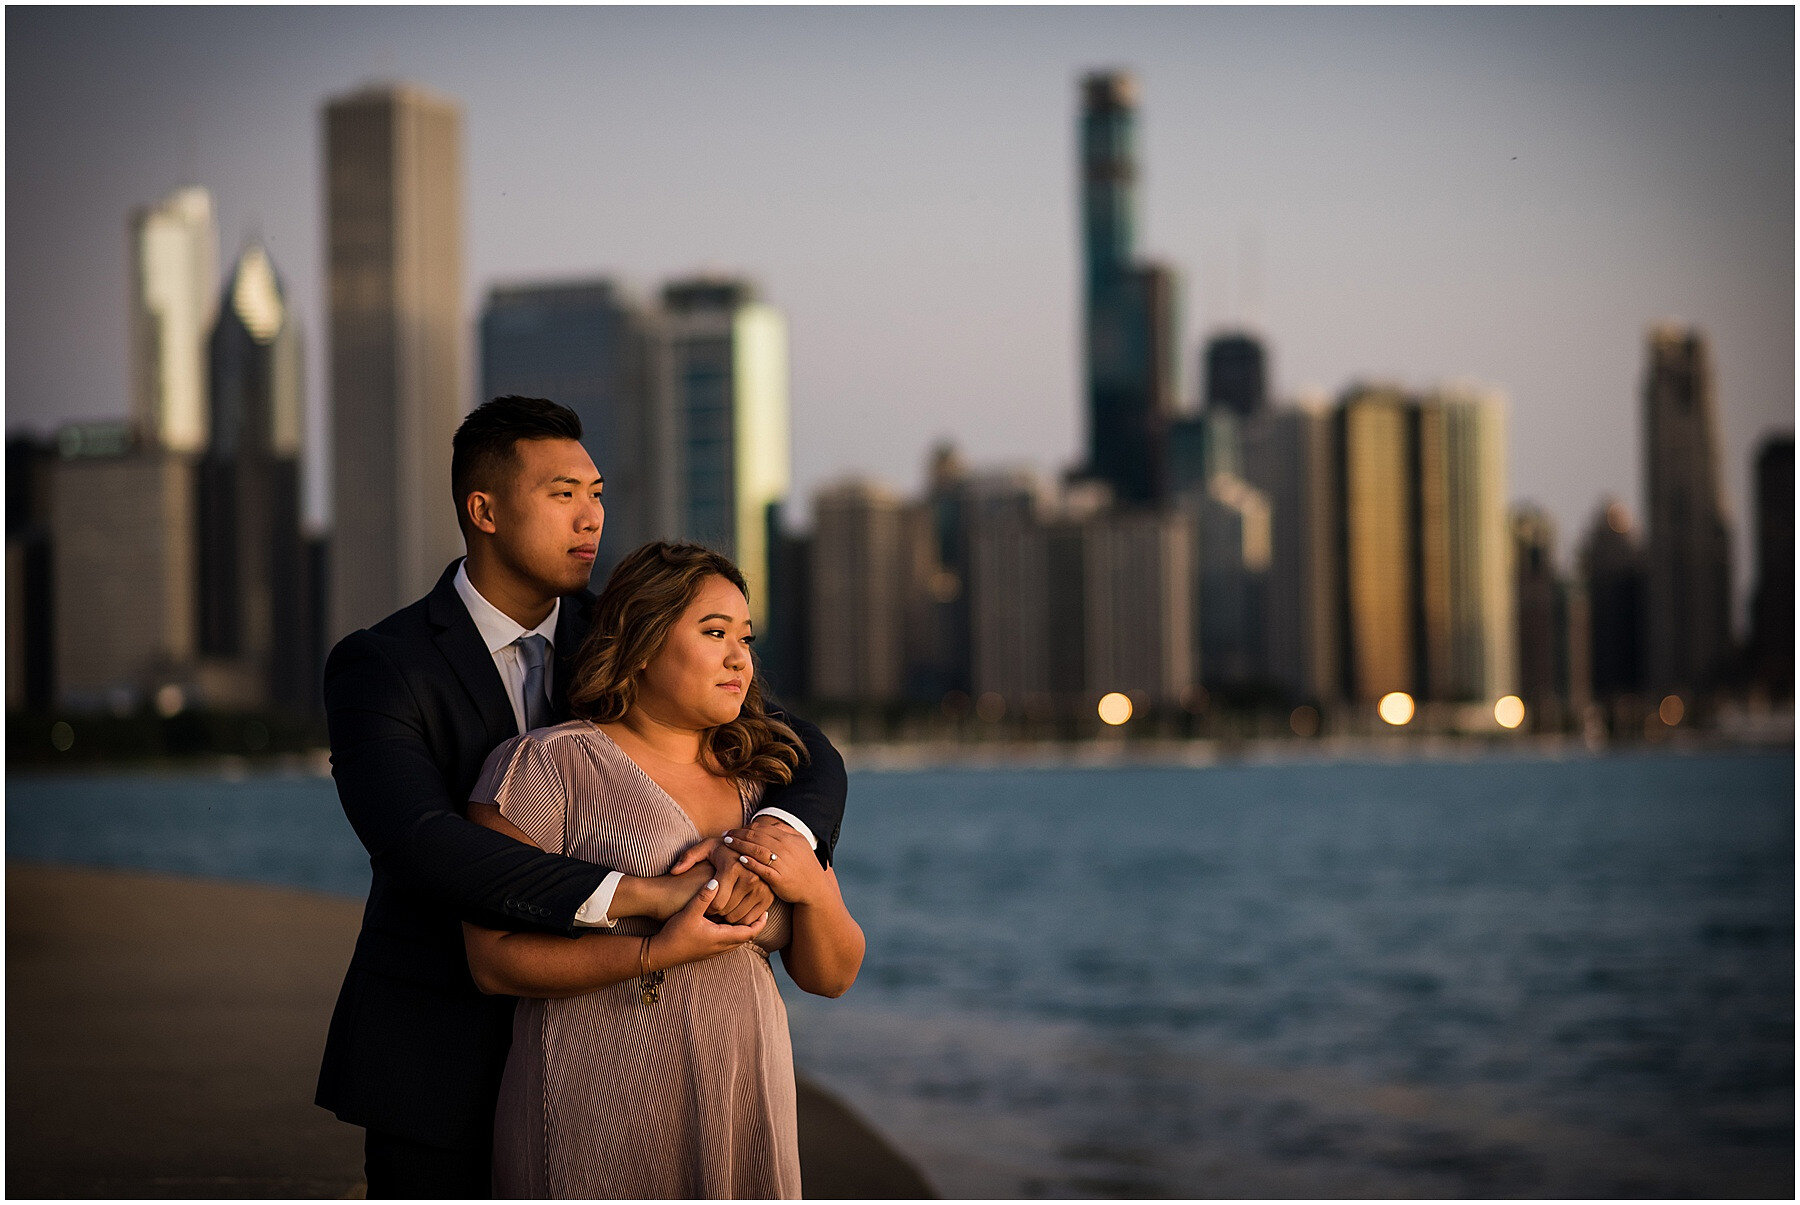 Romantic Chicago Sunrise Engagement Session captured by Inspired Eye Photography featured on CHI thee WED